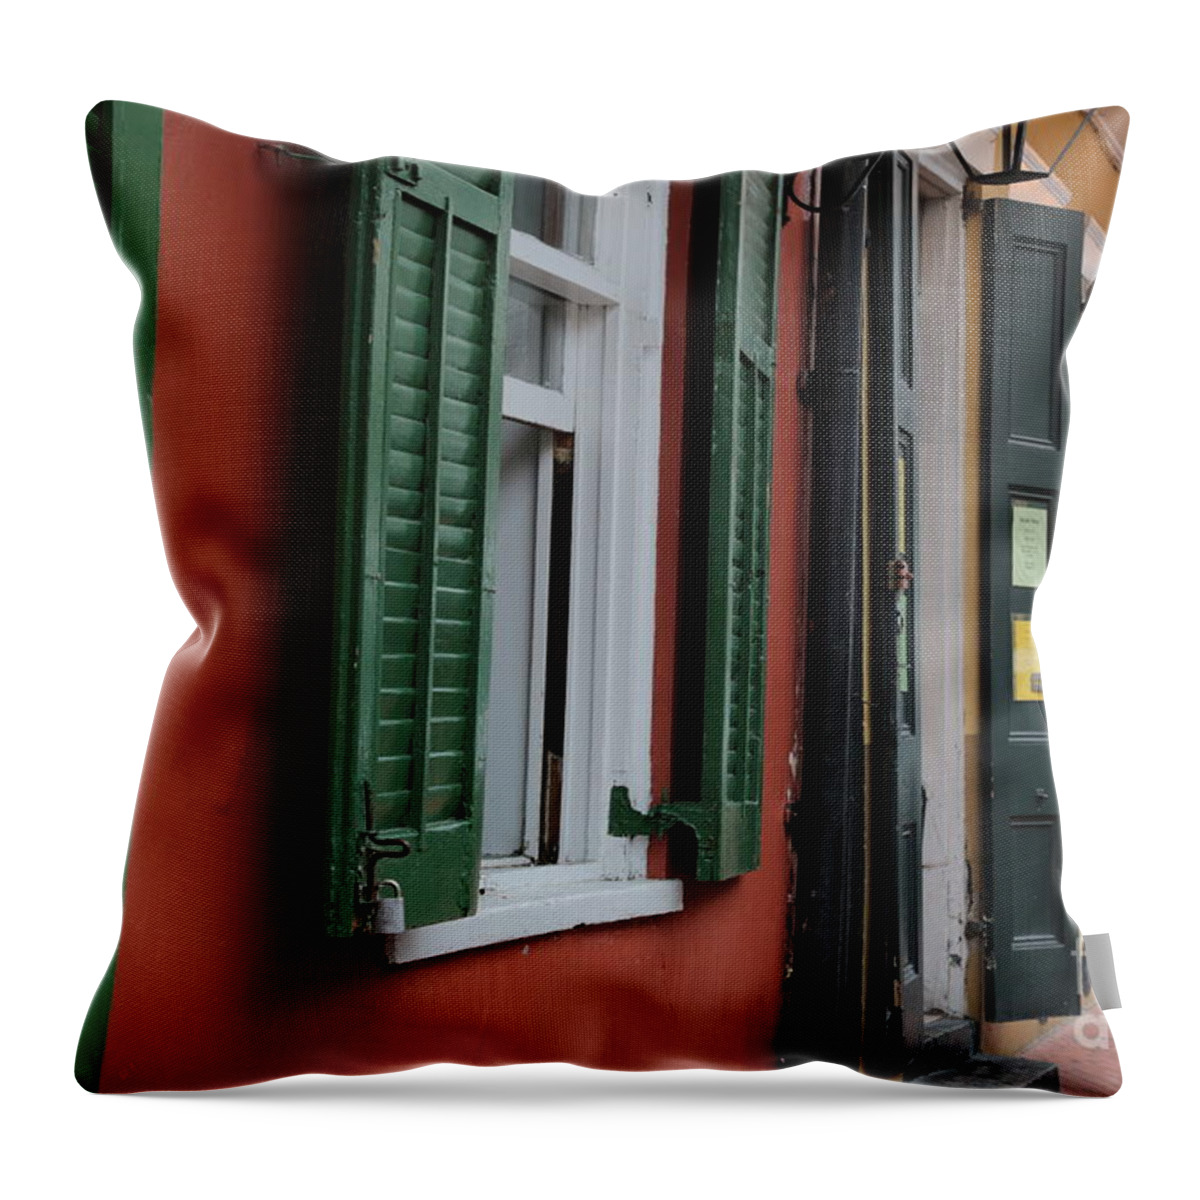 New Orleans Throw Pillow featuring the photograph New Orleans Doors by Carol Groenen